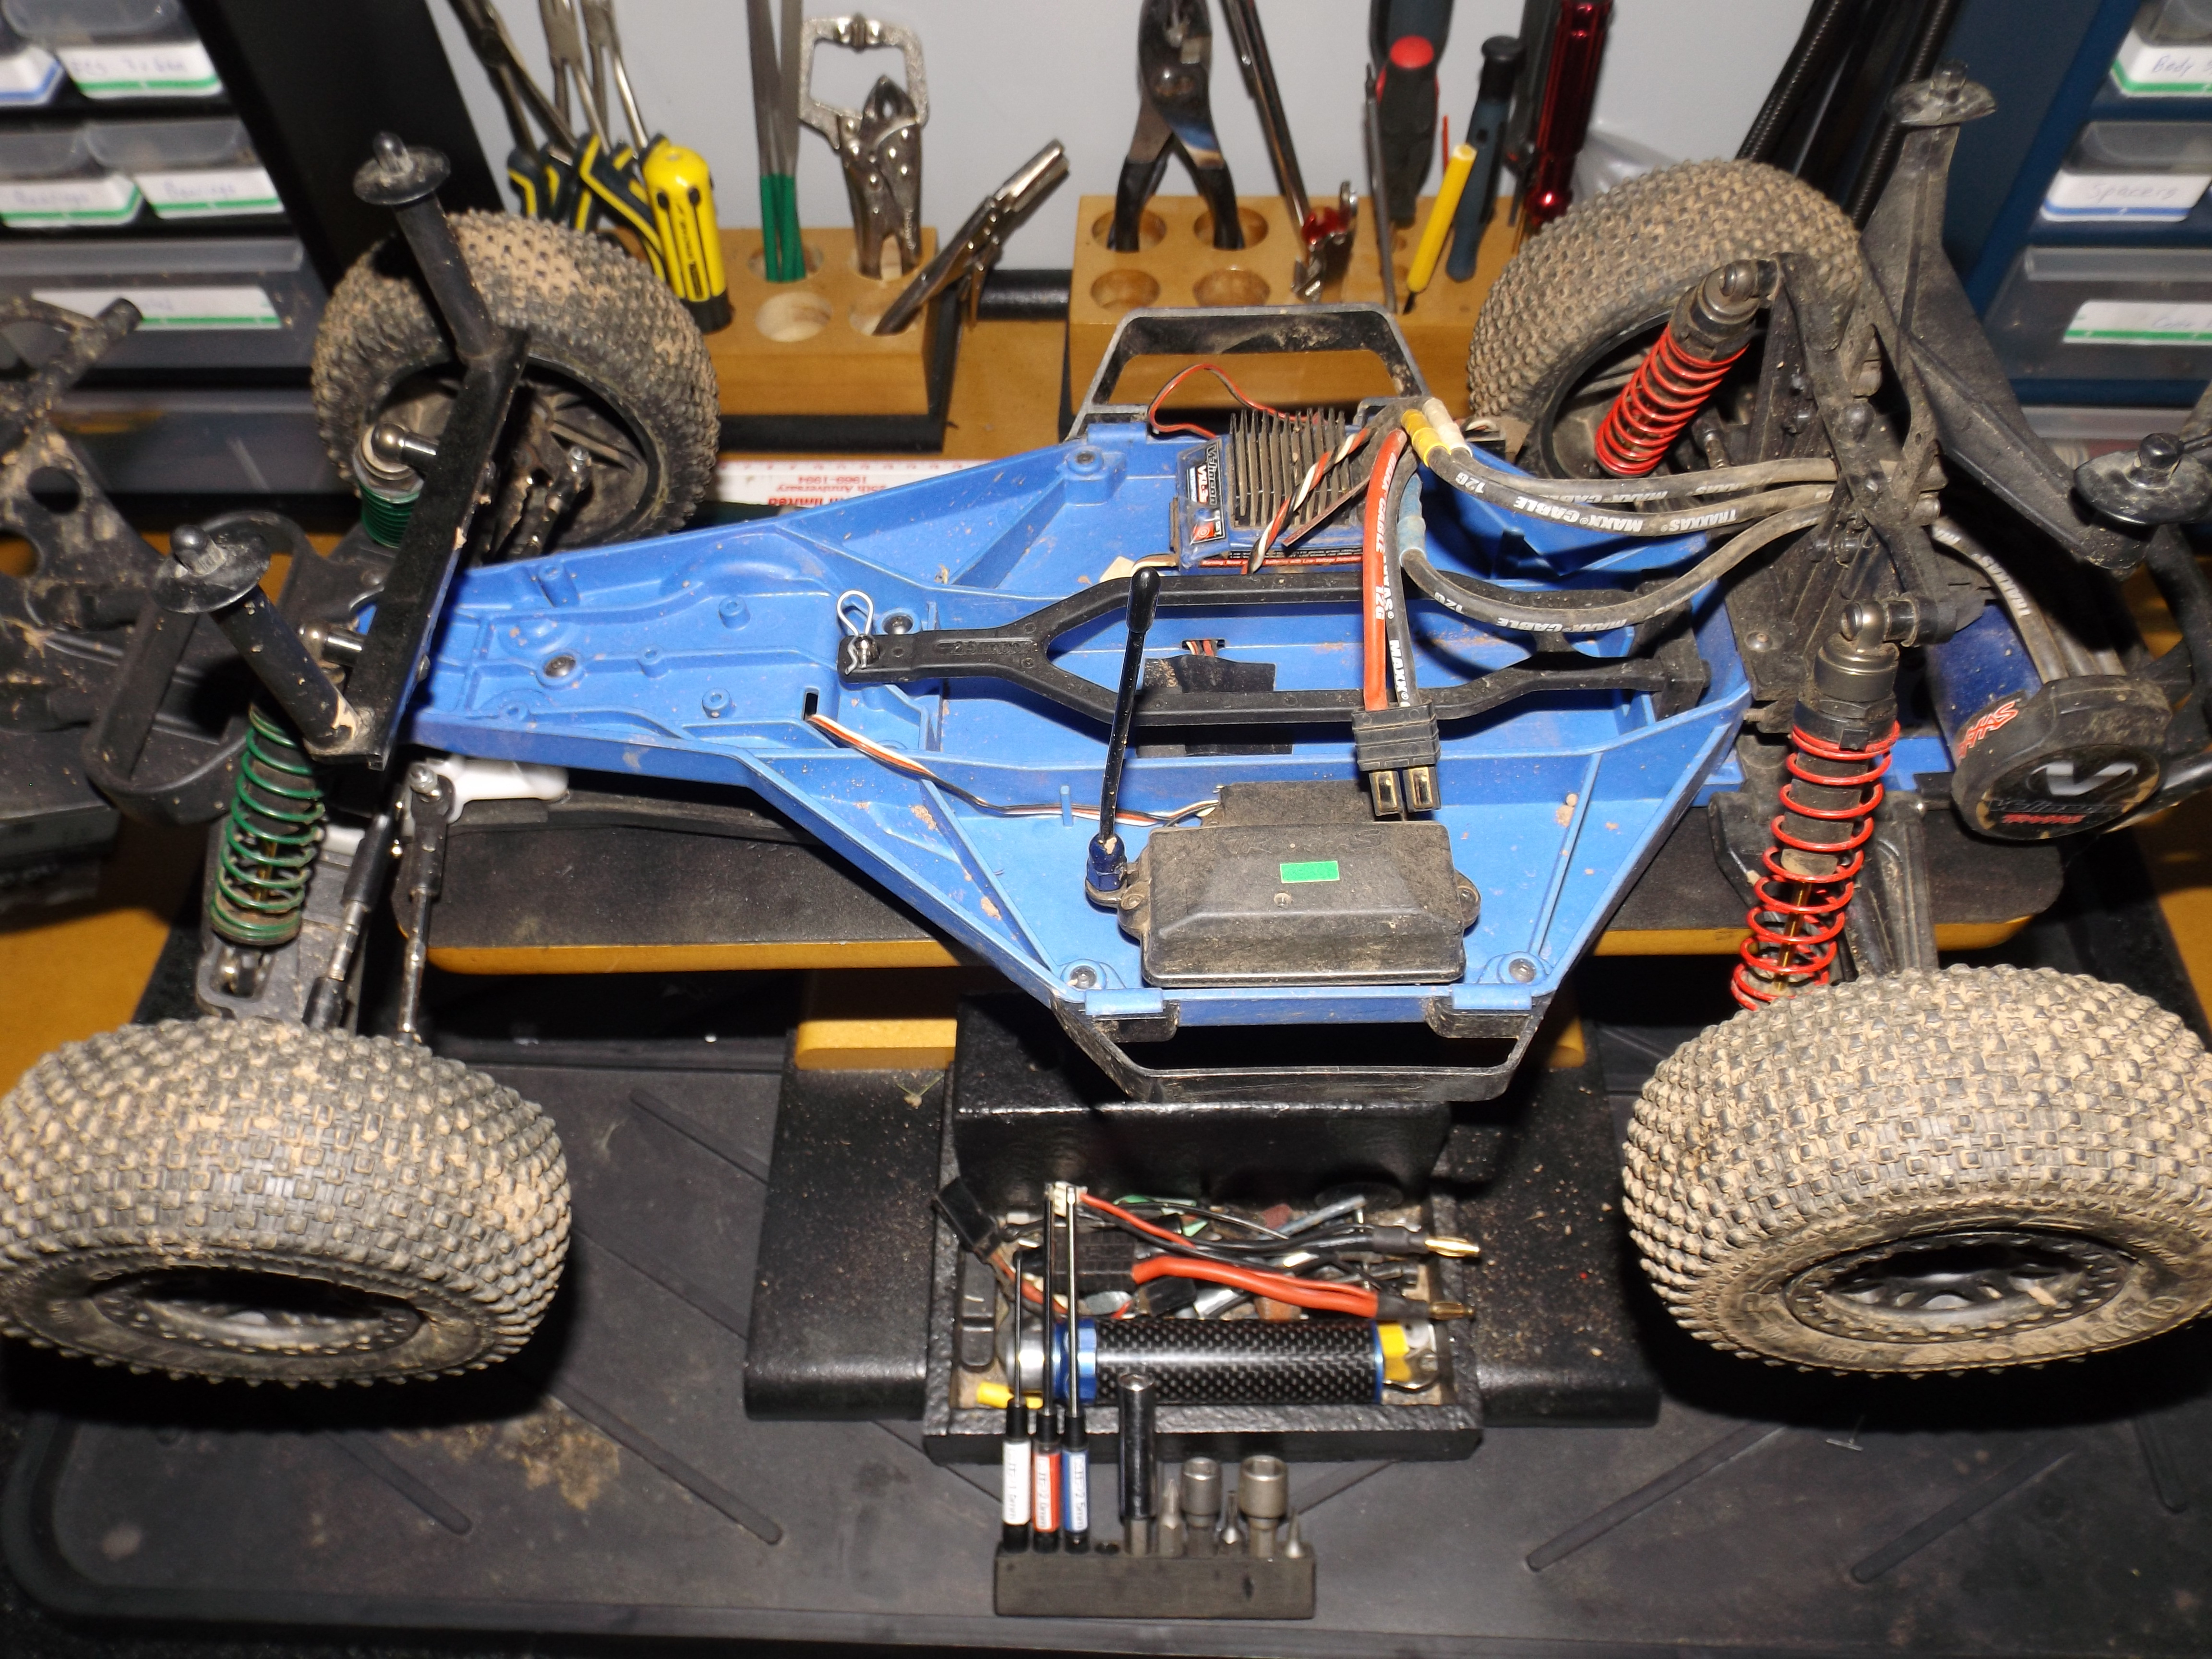 traxxas slash 2wd chassis upgrade